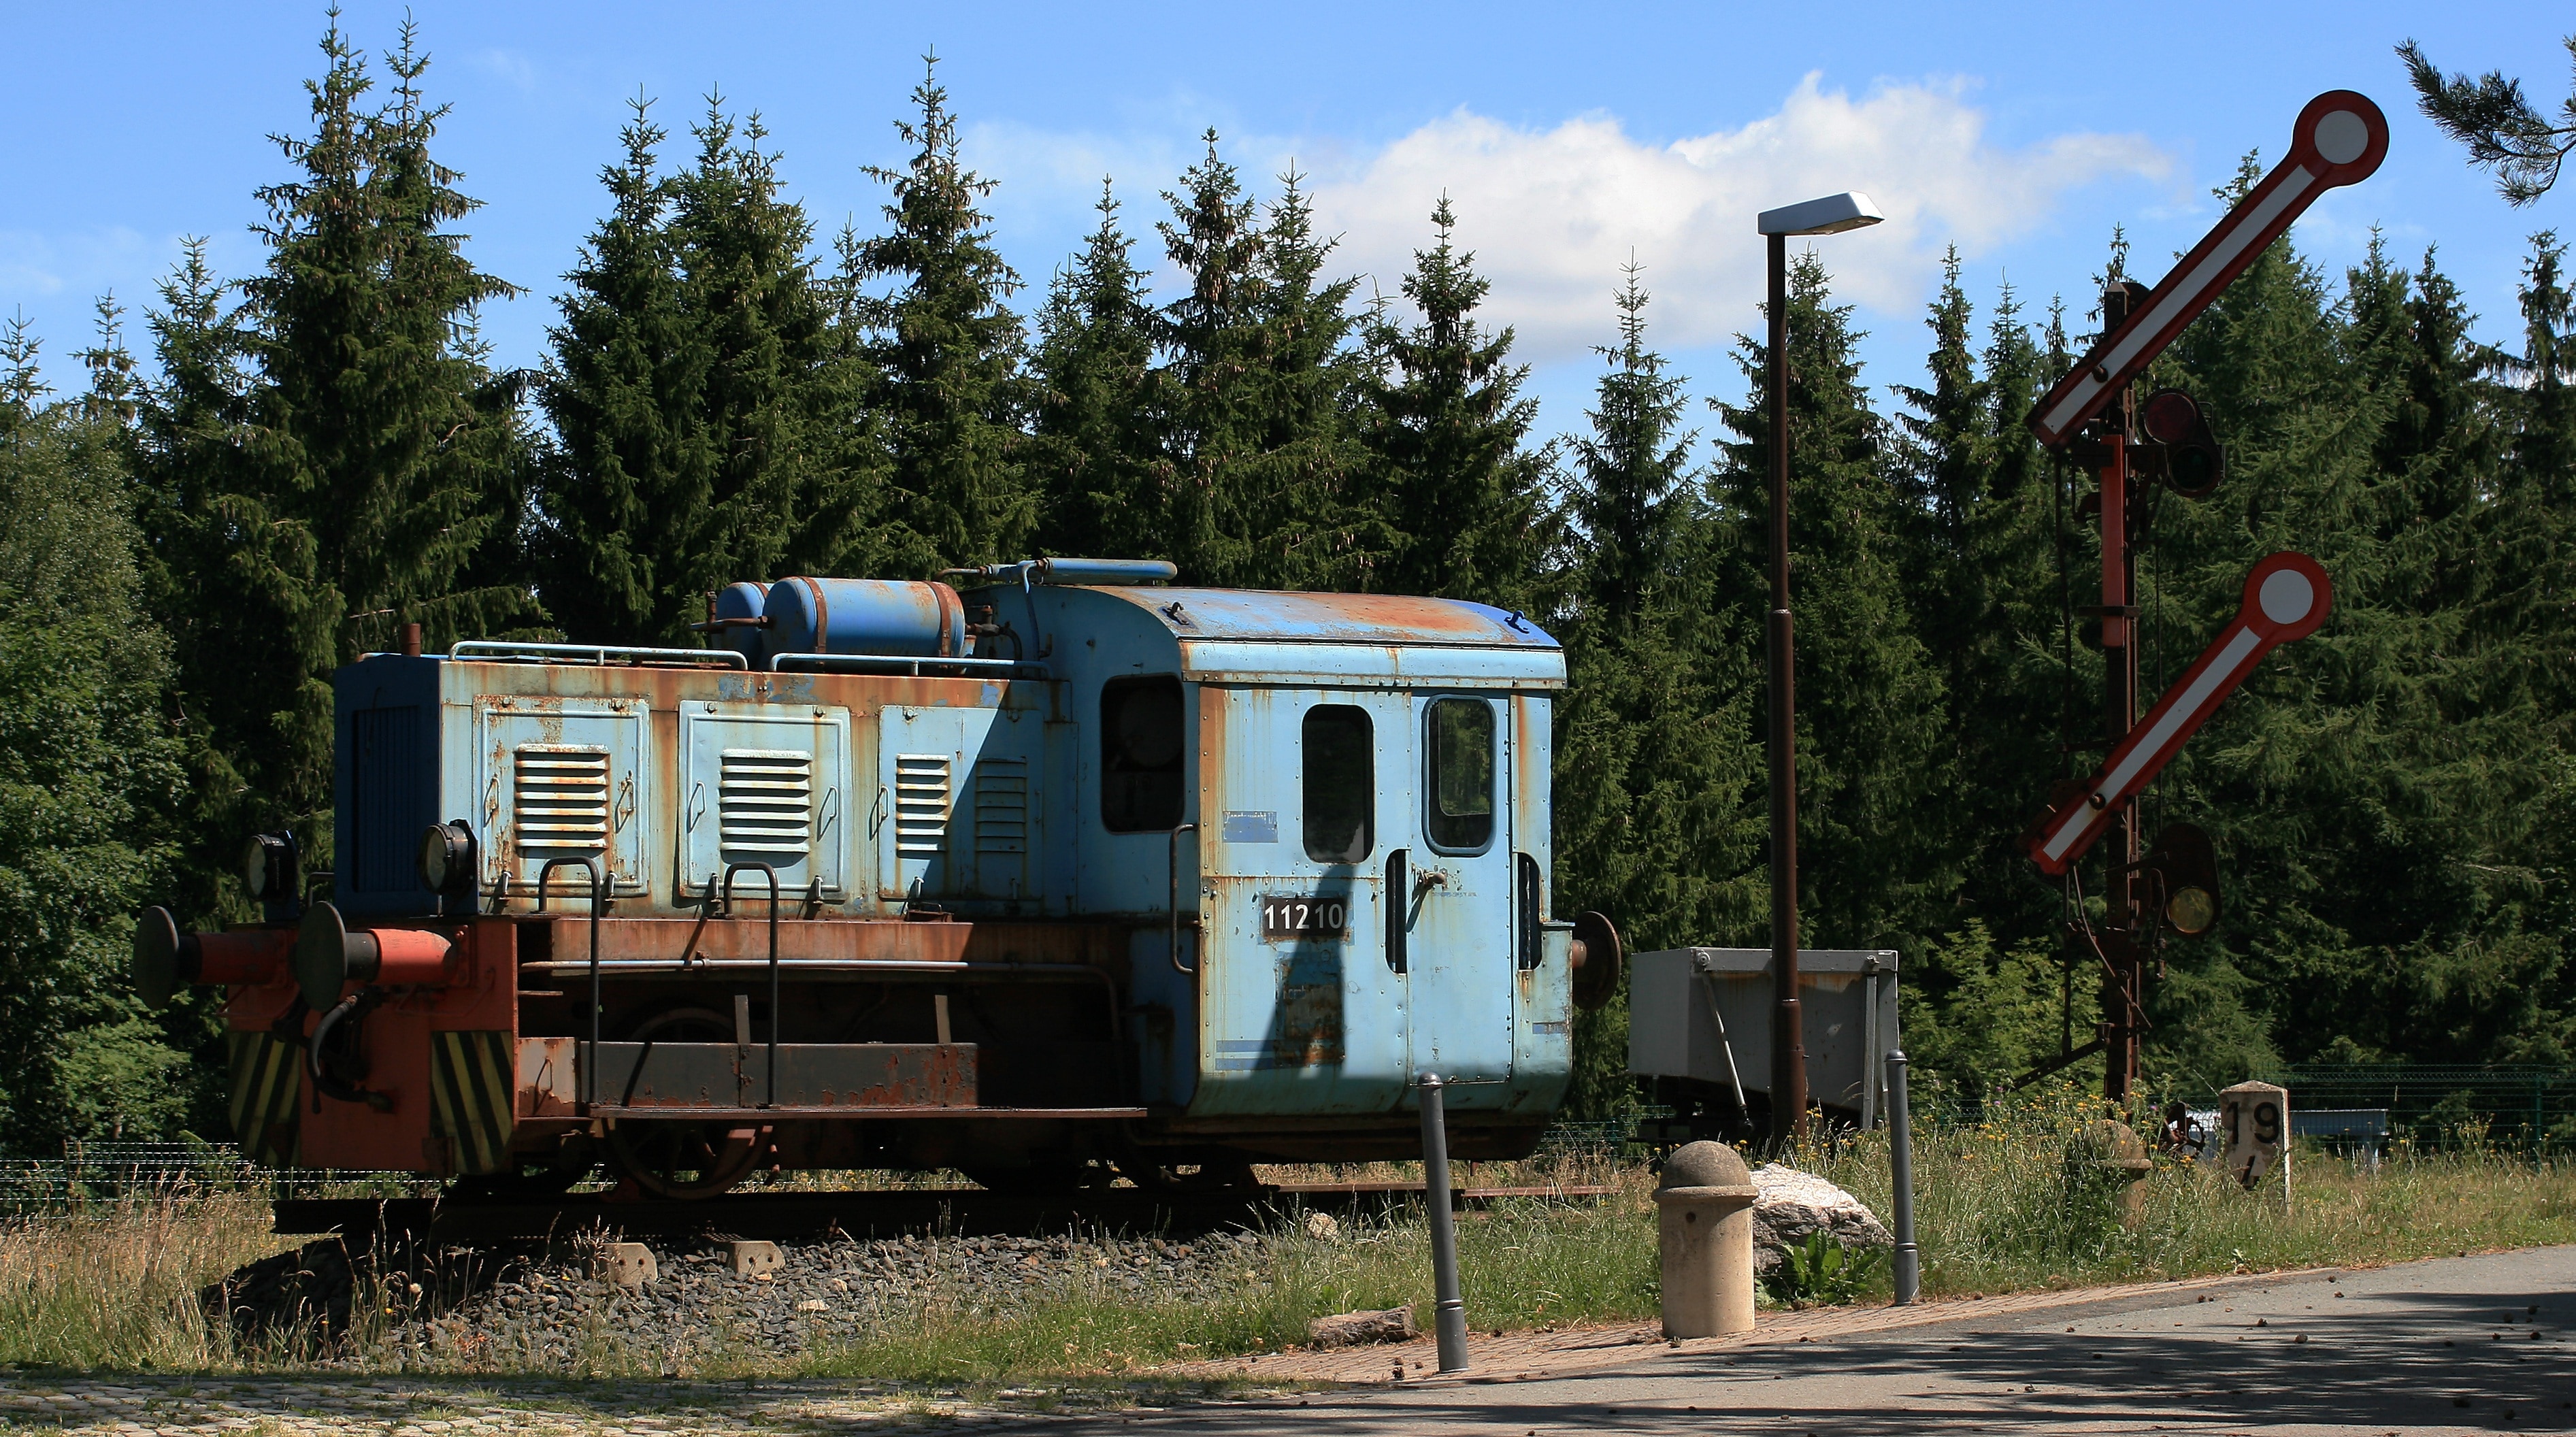 blue and brown locomotive near green pine trees during daytimes